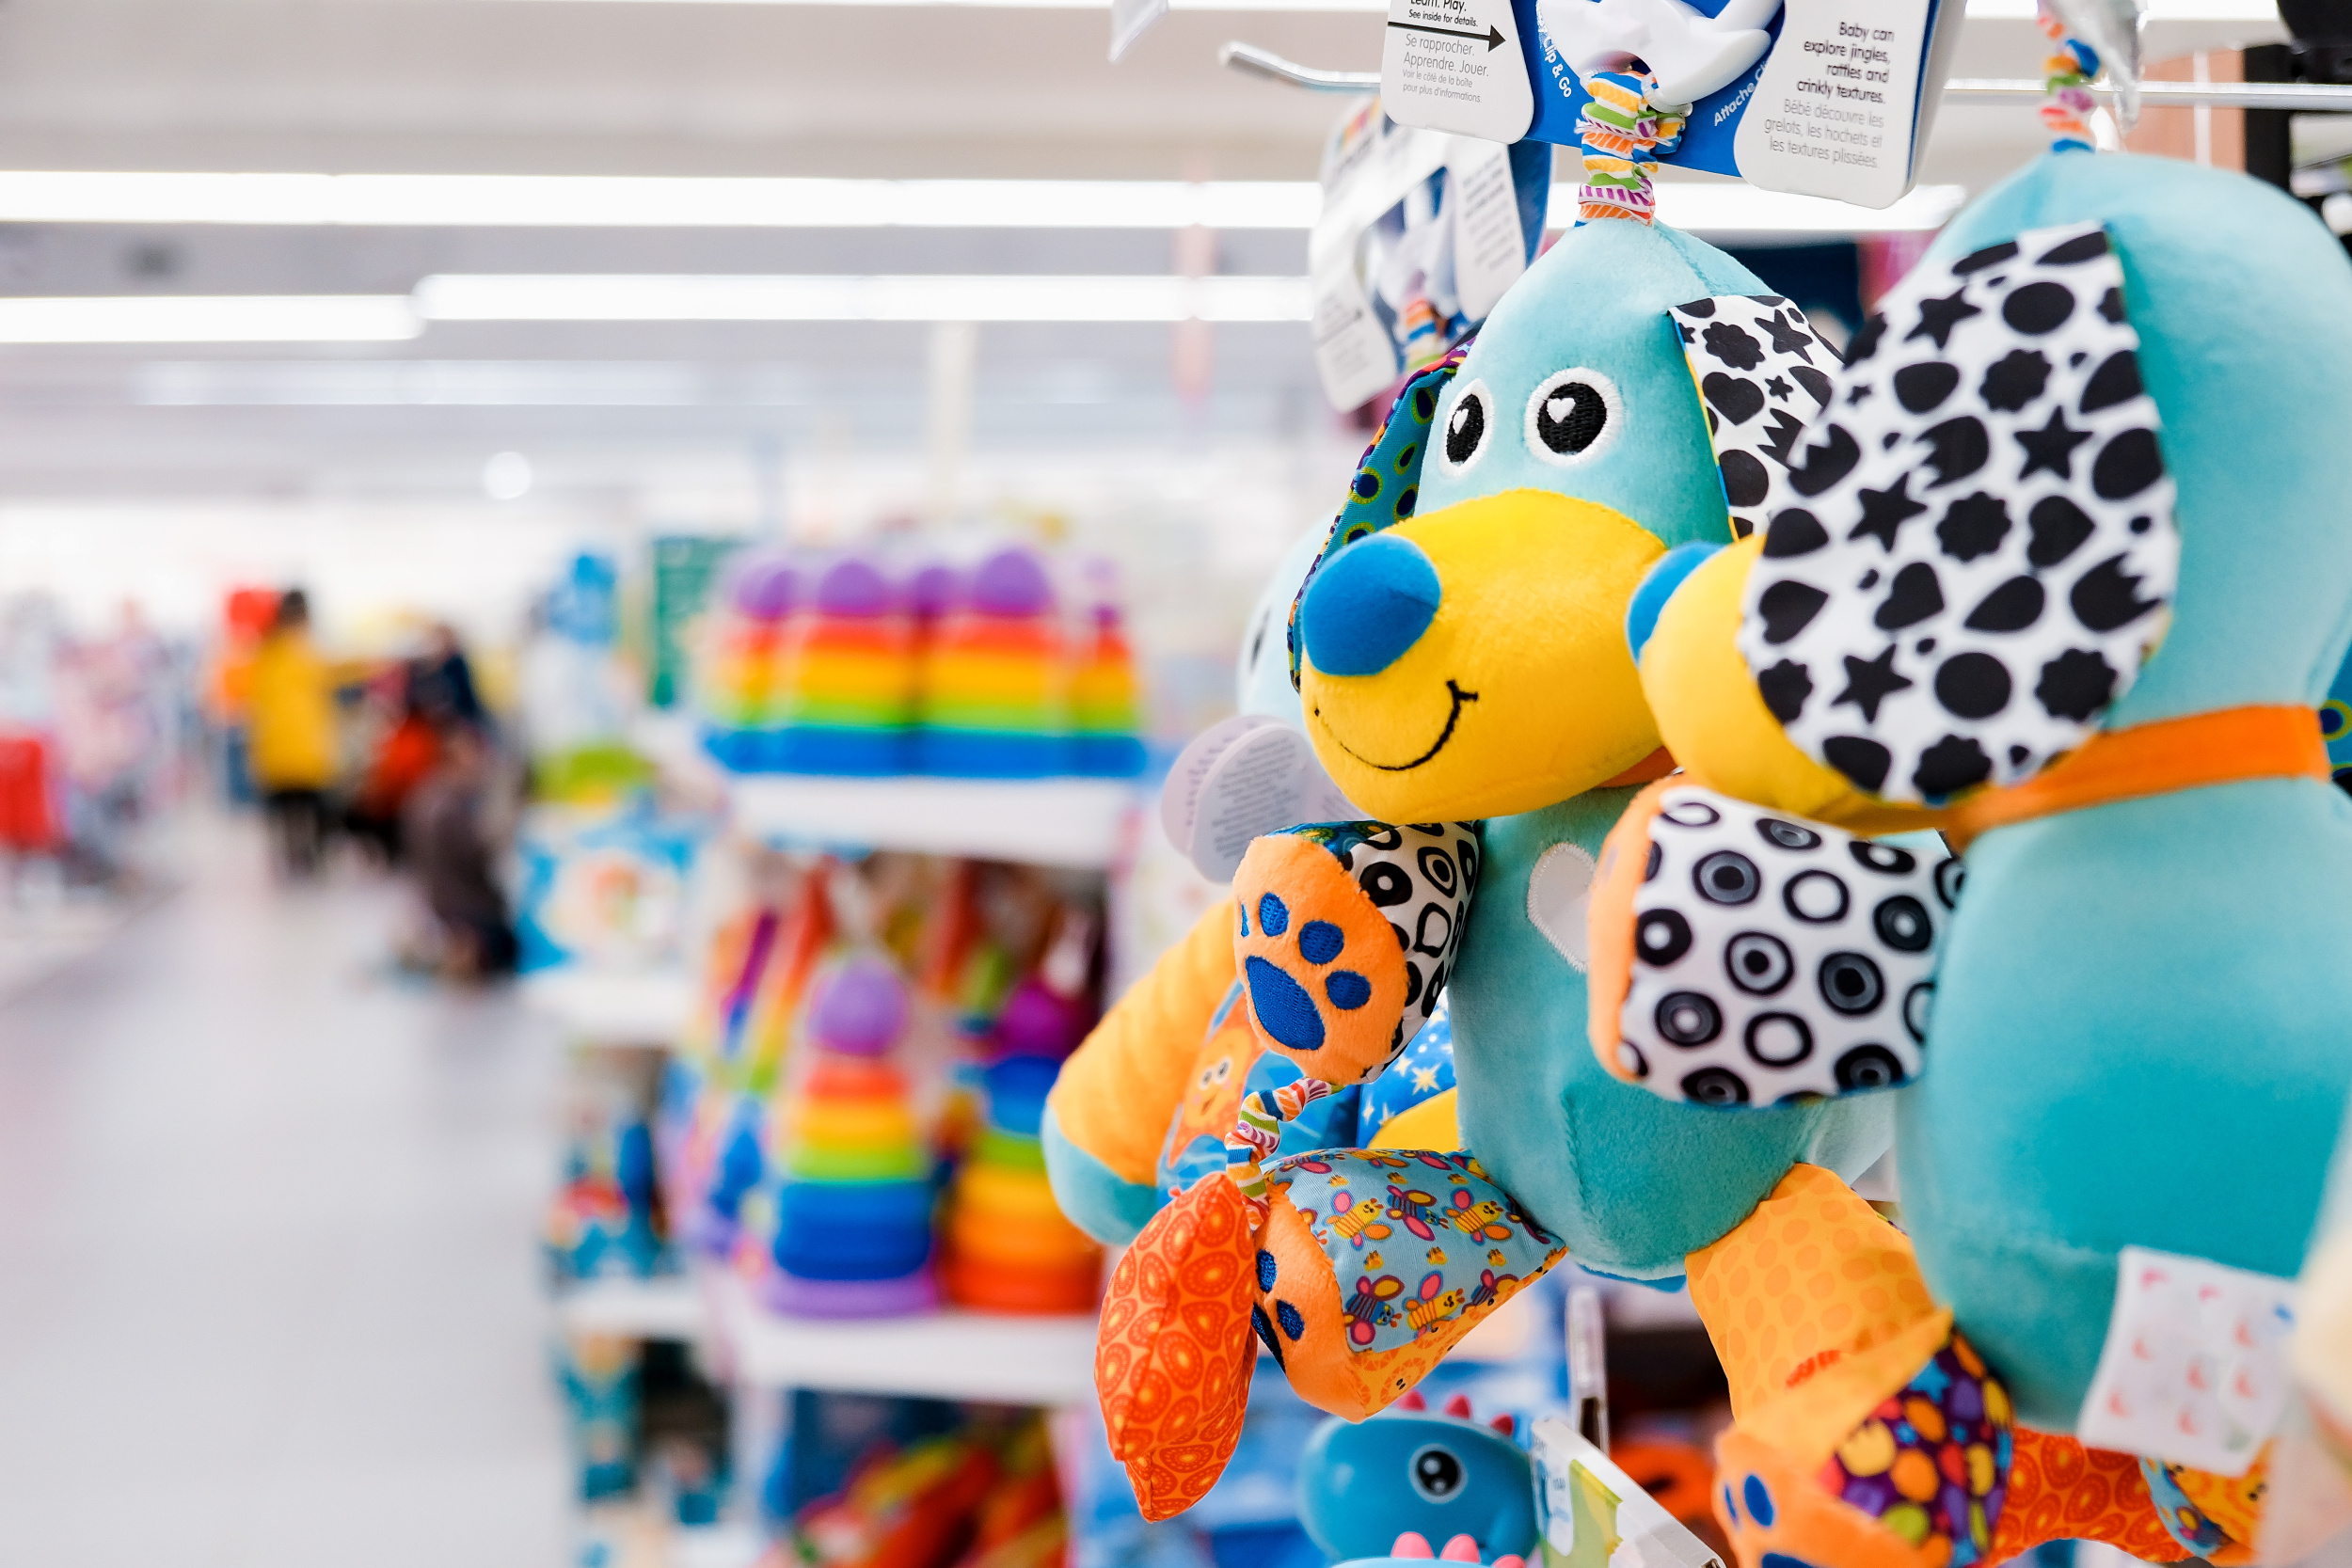 5 shop-toy-store-babies-soft-toy-closeup-shopping-trip-with-blurry-background.jpg